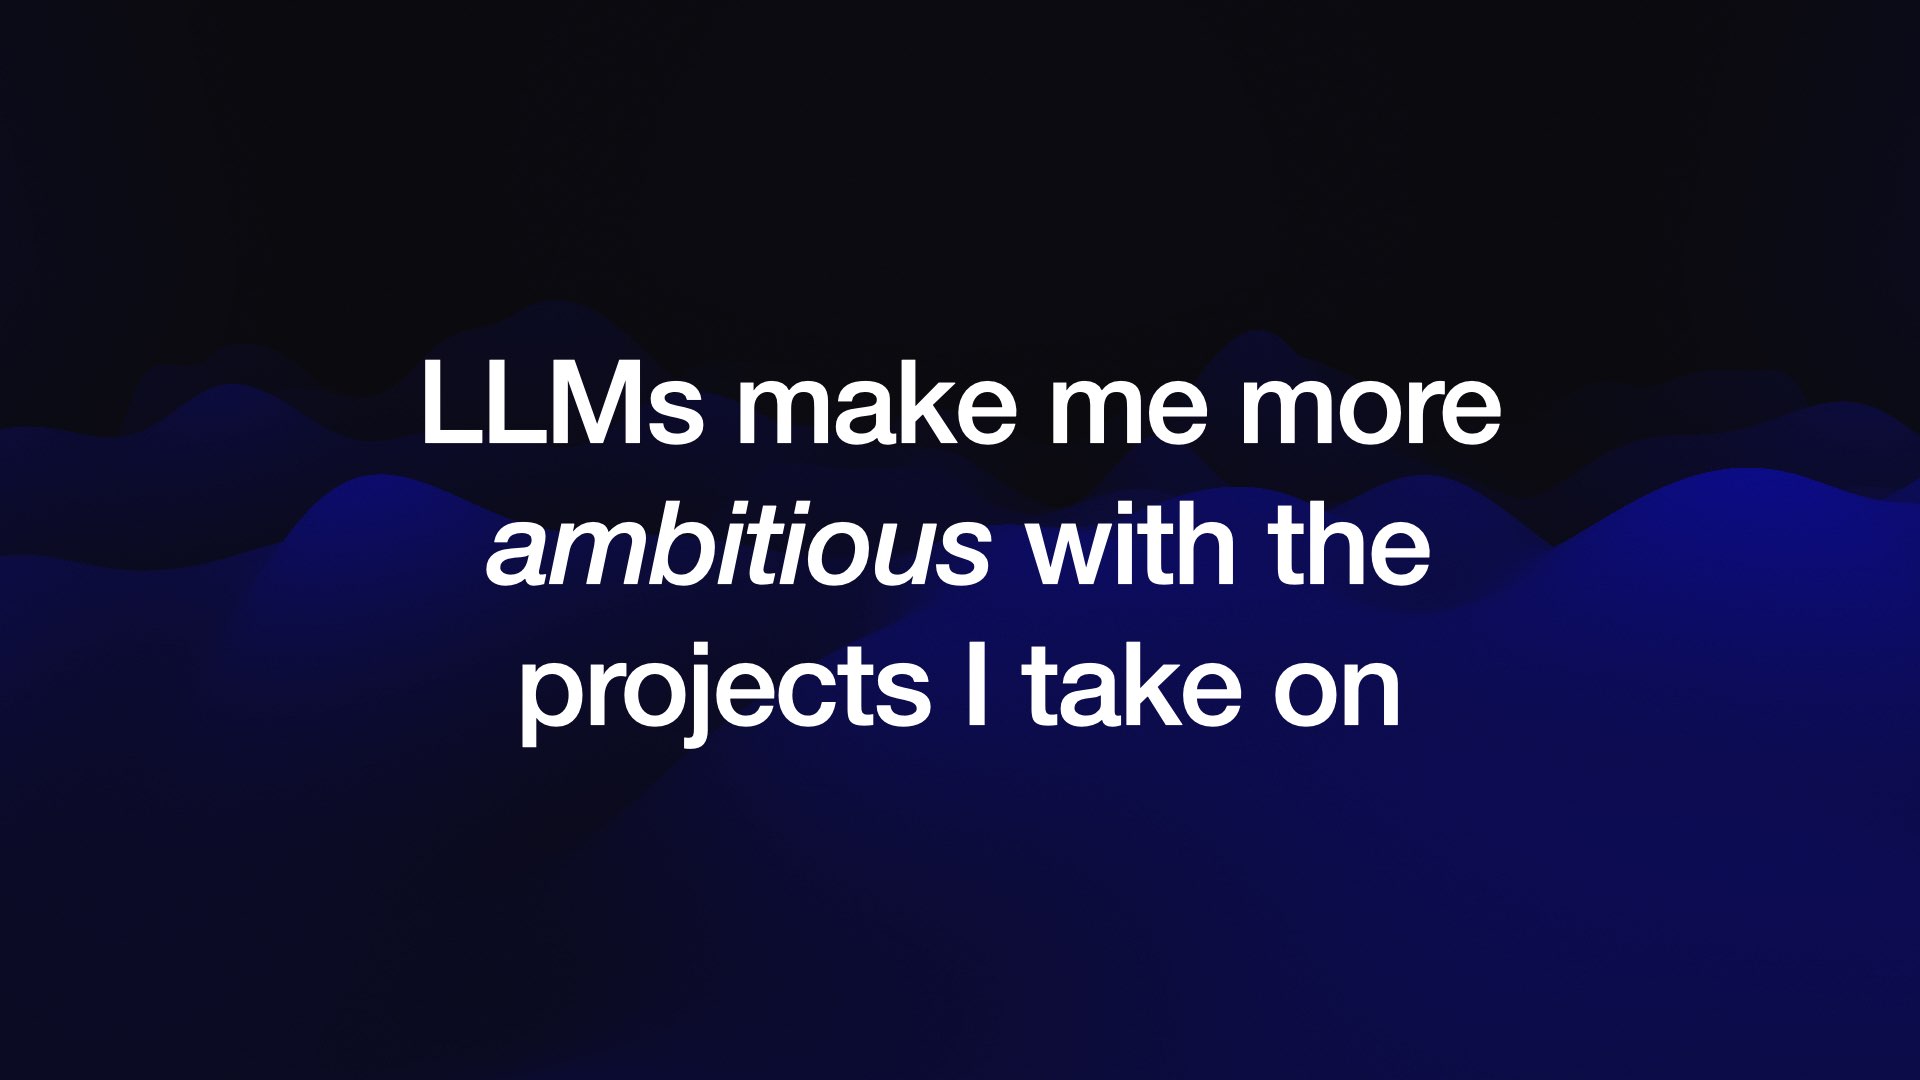 LLMs make me more ambitious with the projects I take on